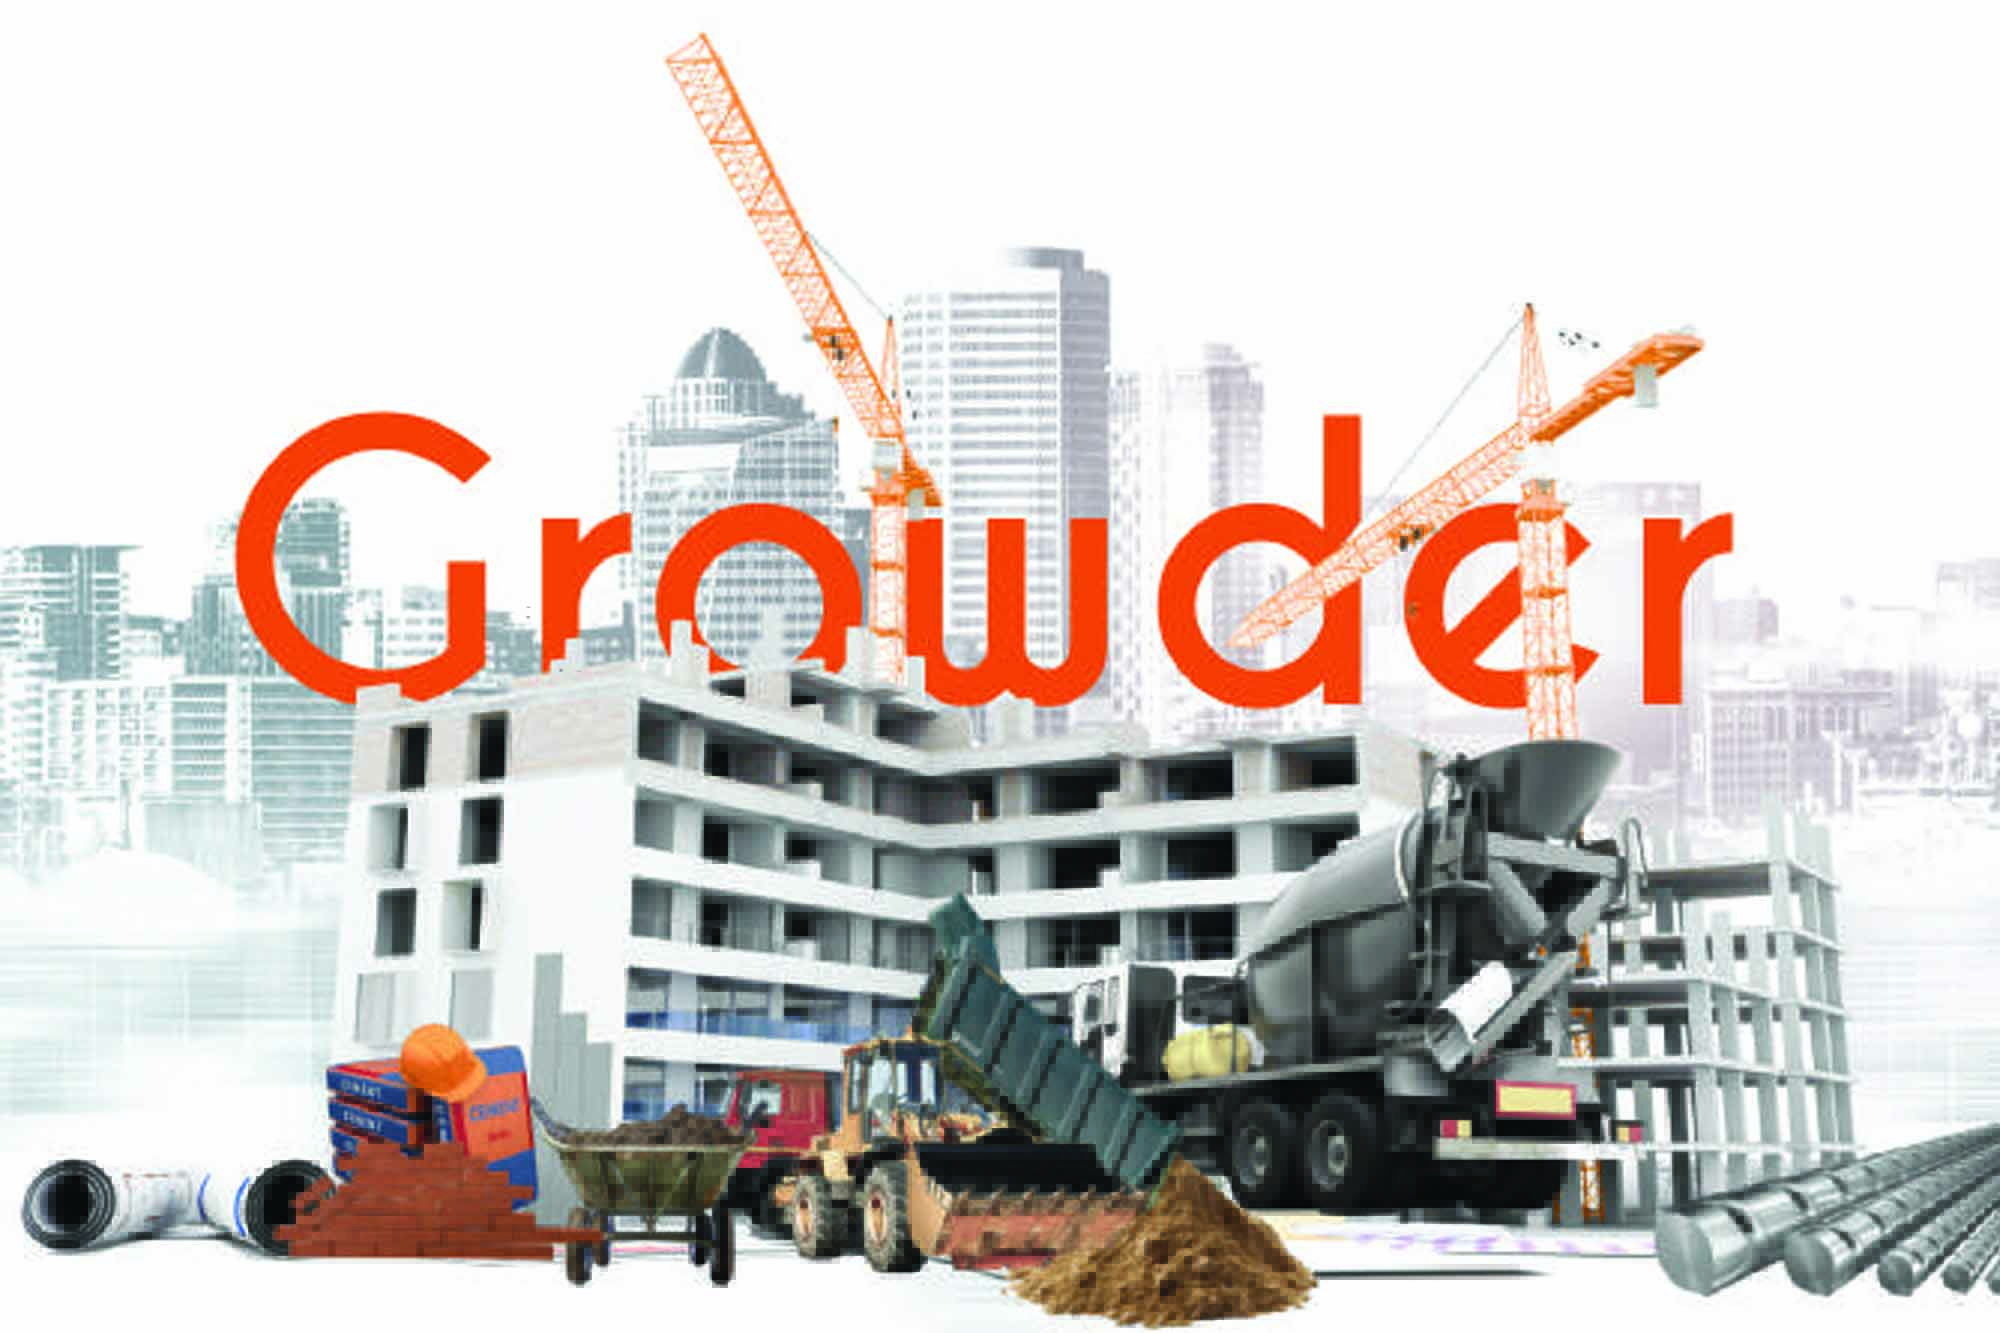 Growder actively contribute to the sector's growth, aligning with evolving consumer preferences for sustainable and high-quality homes.